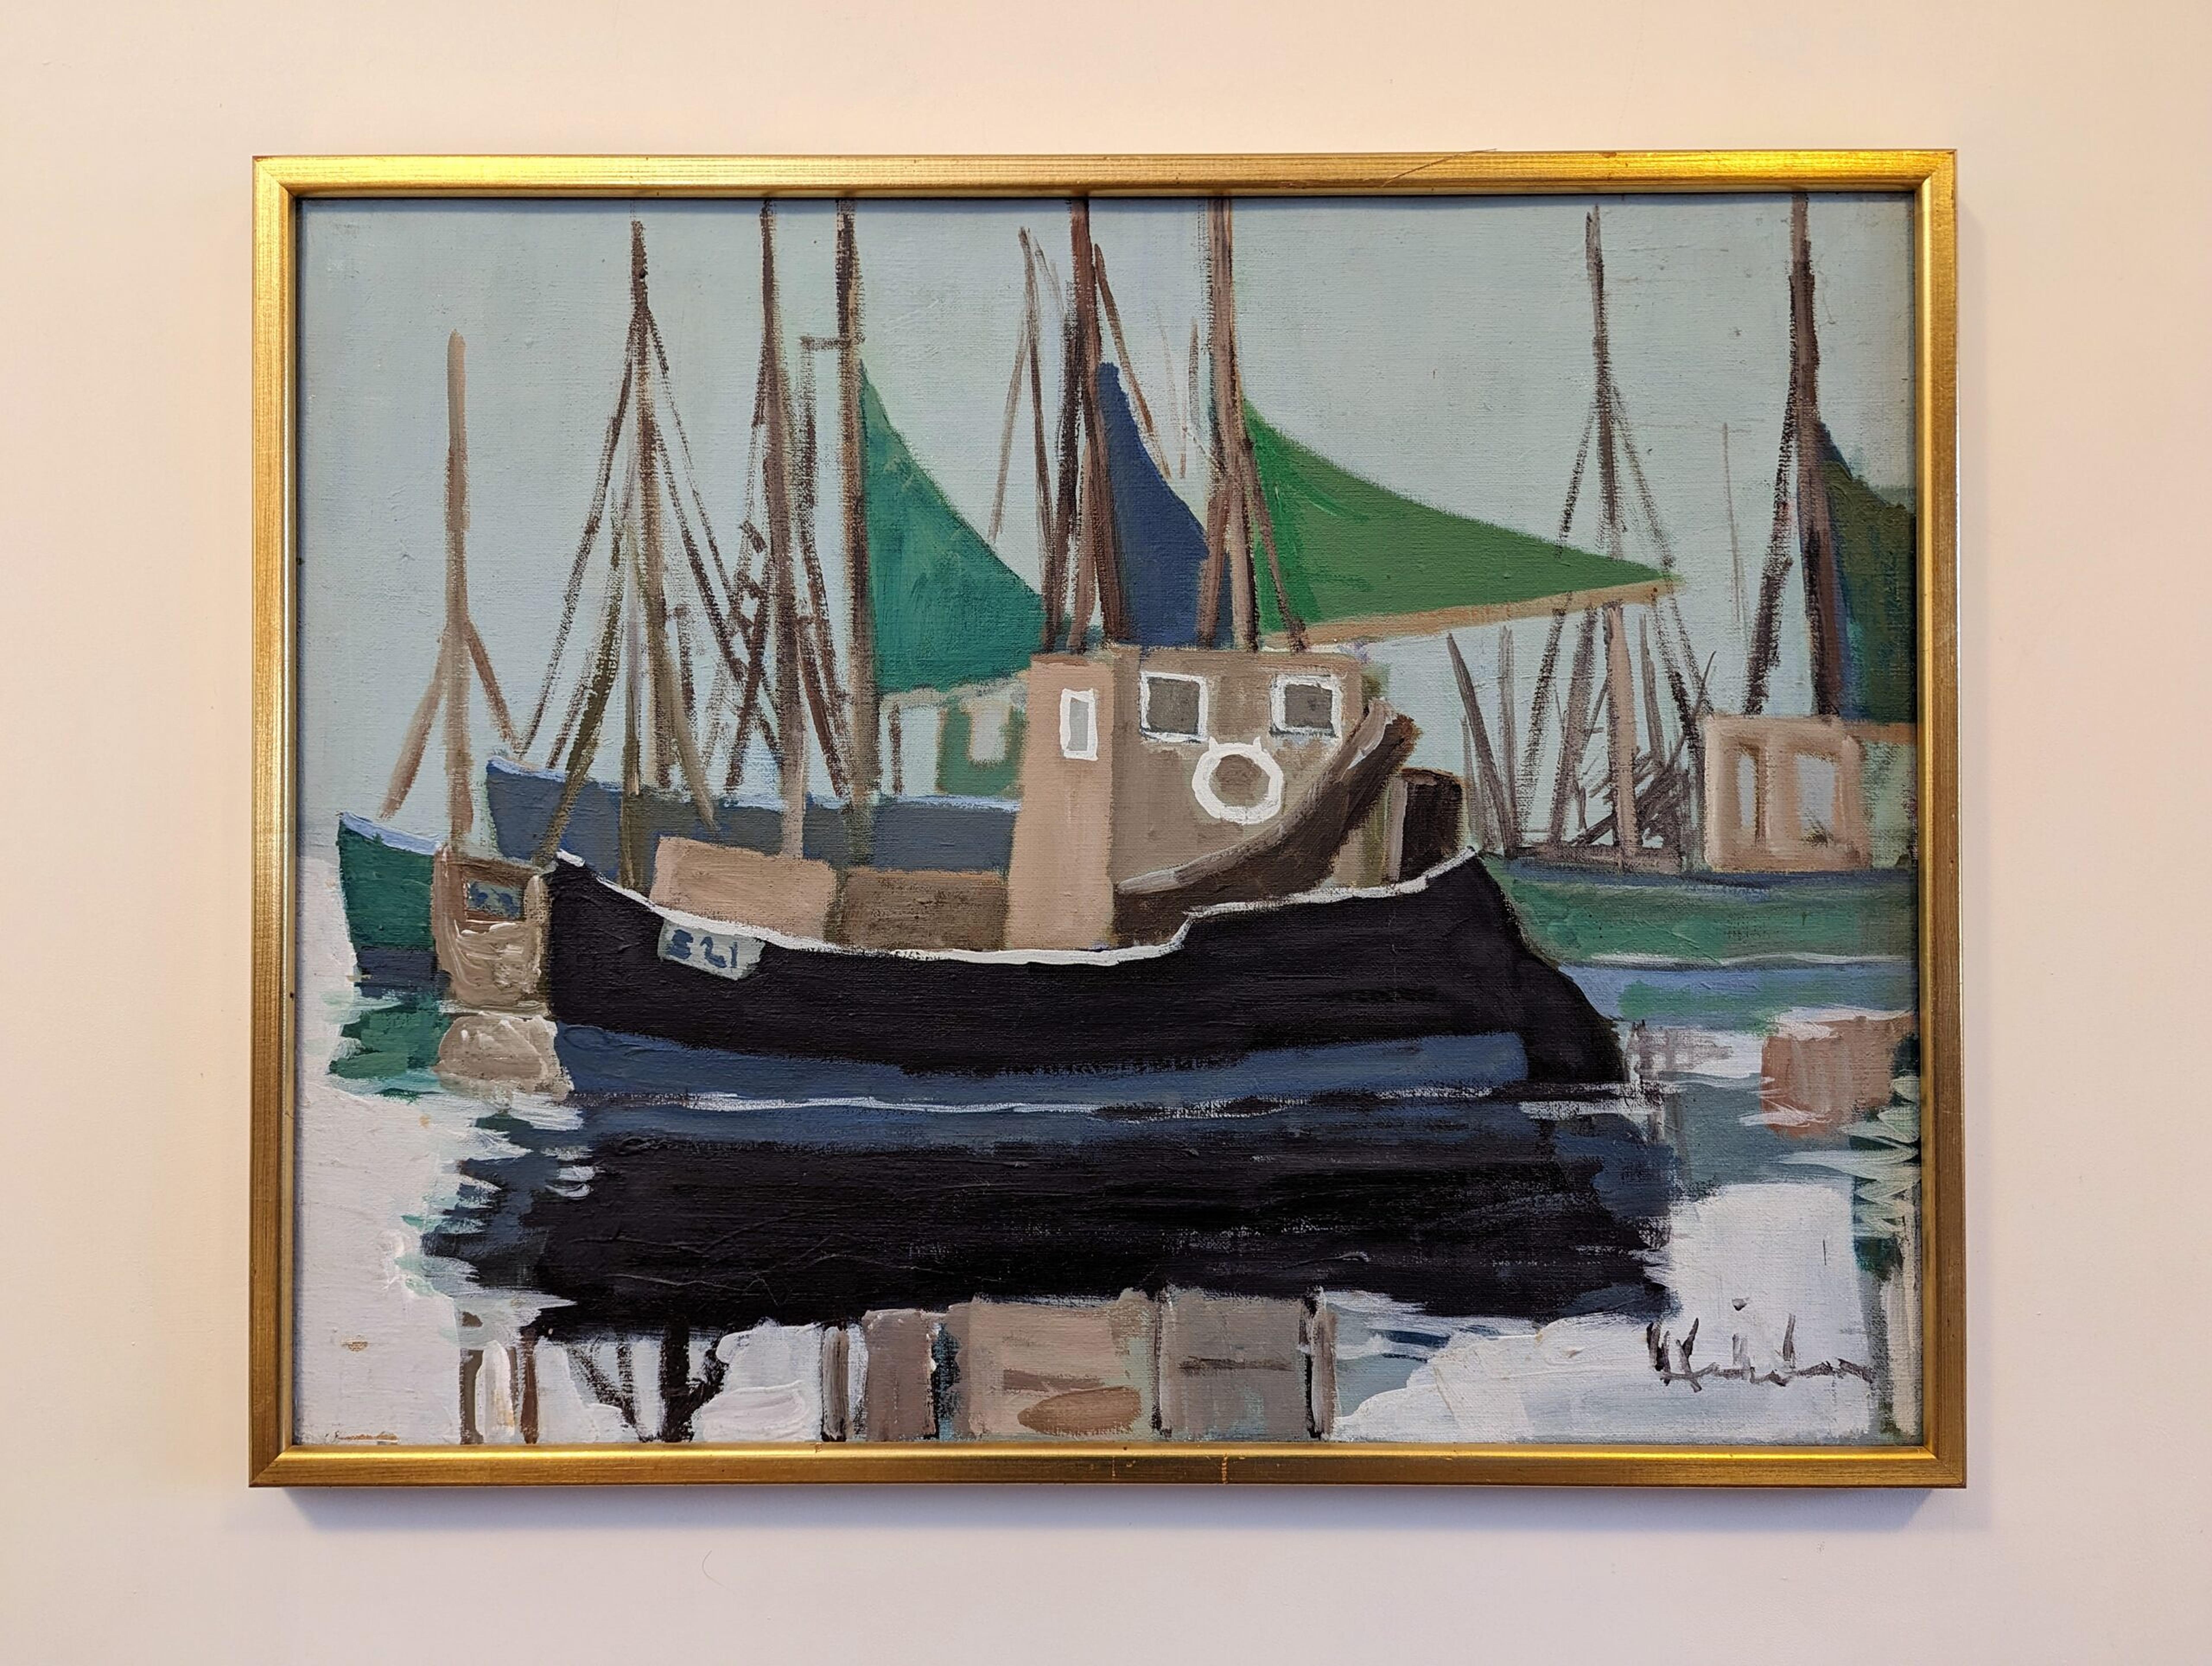 GREEN SAILS
Size: 53 x 68 cm (including frame)
Oil on Canvas

A brilliantly executed mid-century modernist seascape composition, executed in oil onto canvas.

Distinctively modernist in style, the artist here has played with shape, form and colour